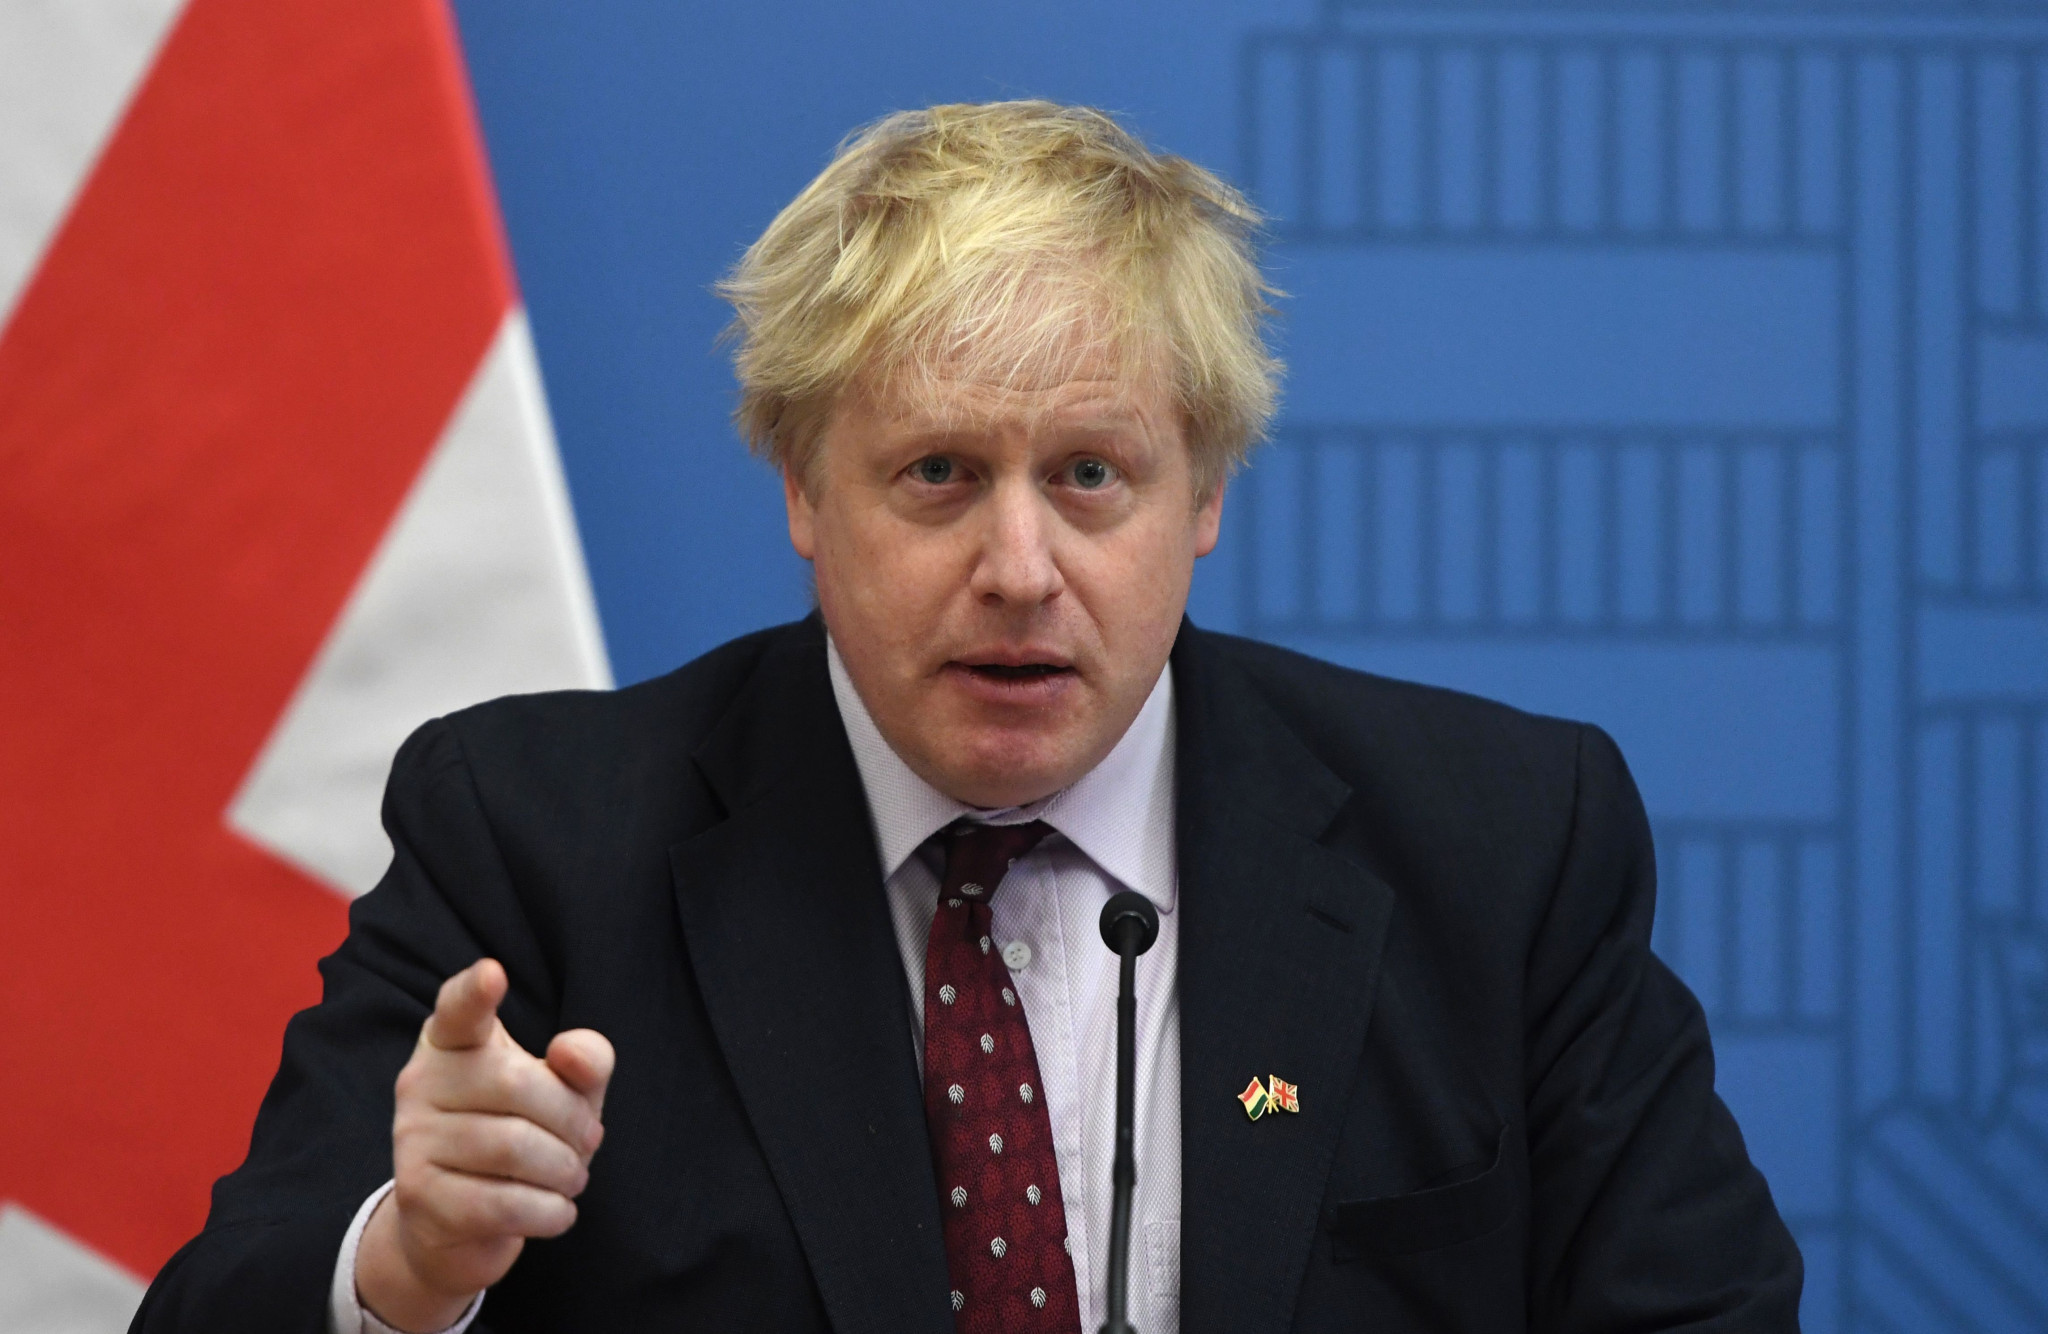 UK Prime Minister Boris Johnson has faced backlash on social media after suggesting that Ukraine should get bye for Qatar 2022 FIFA World Cup ©Getty Images